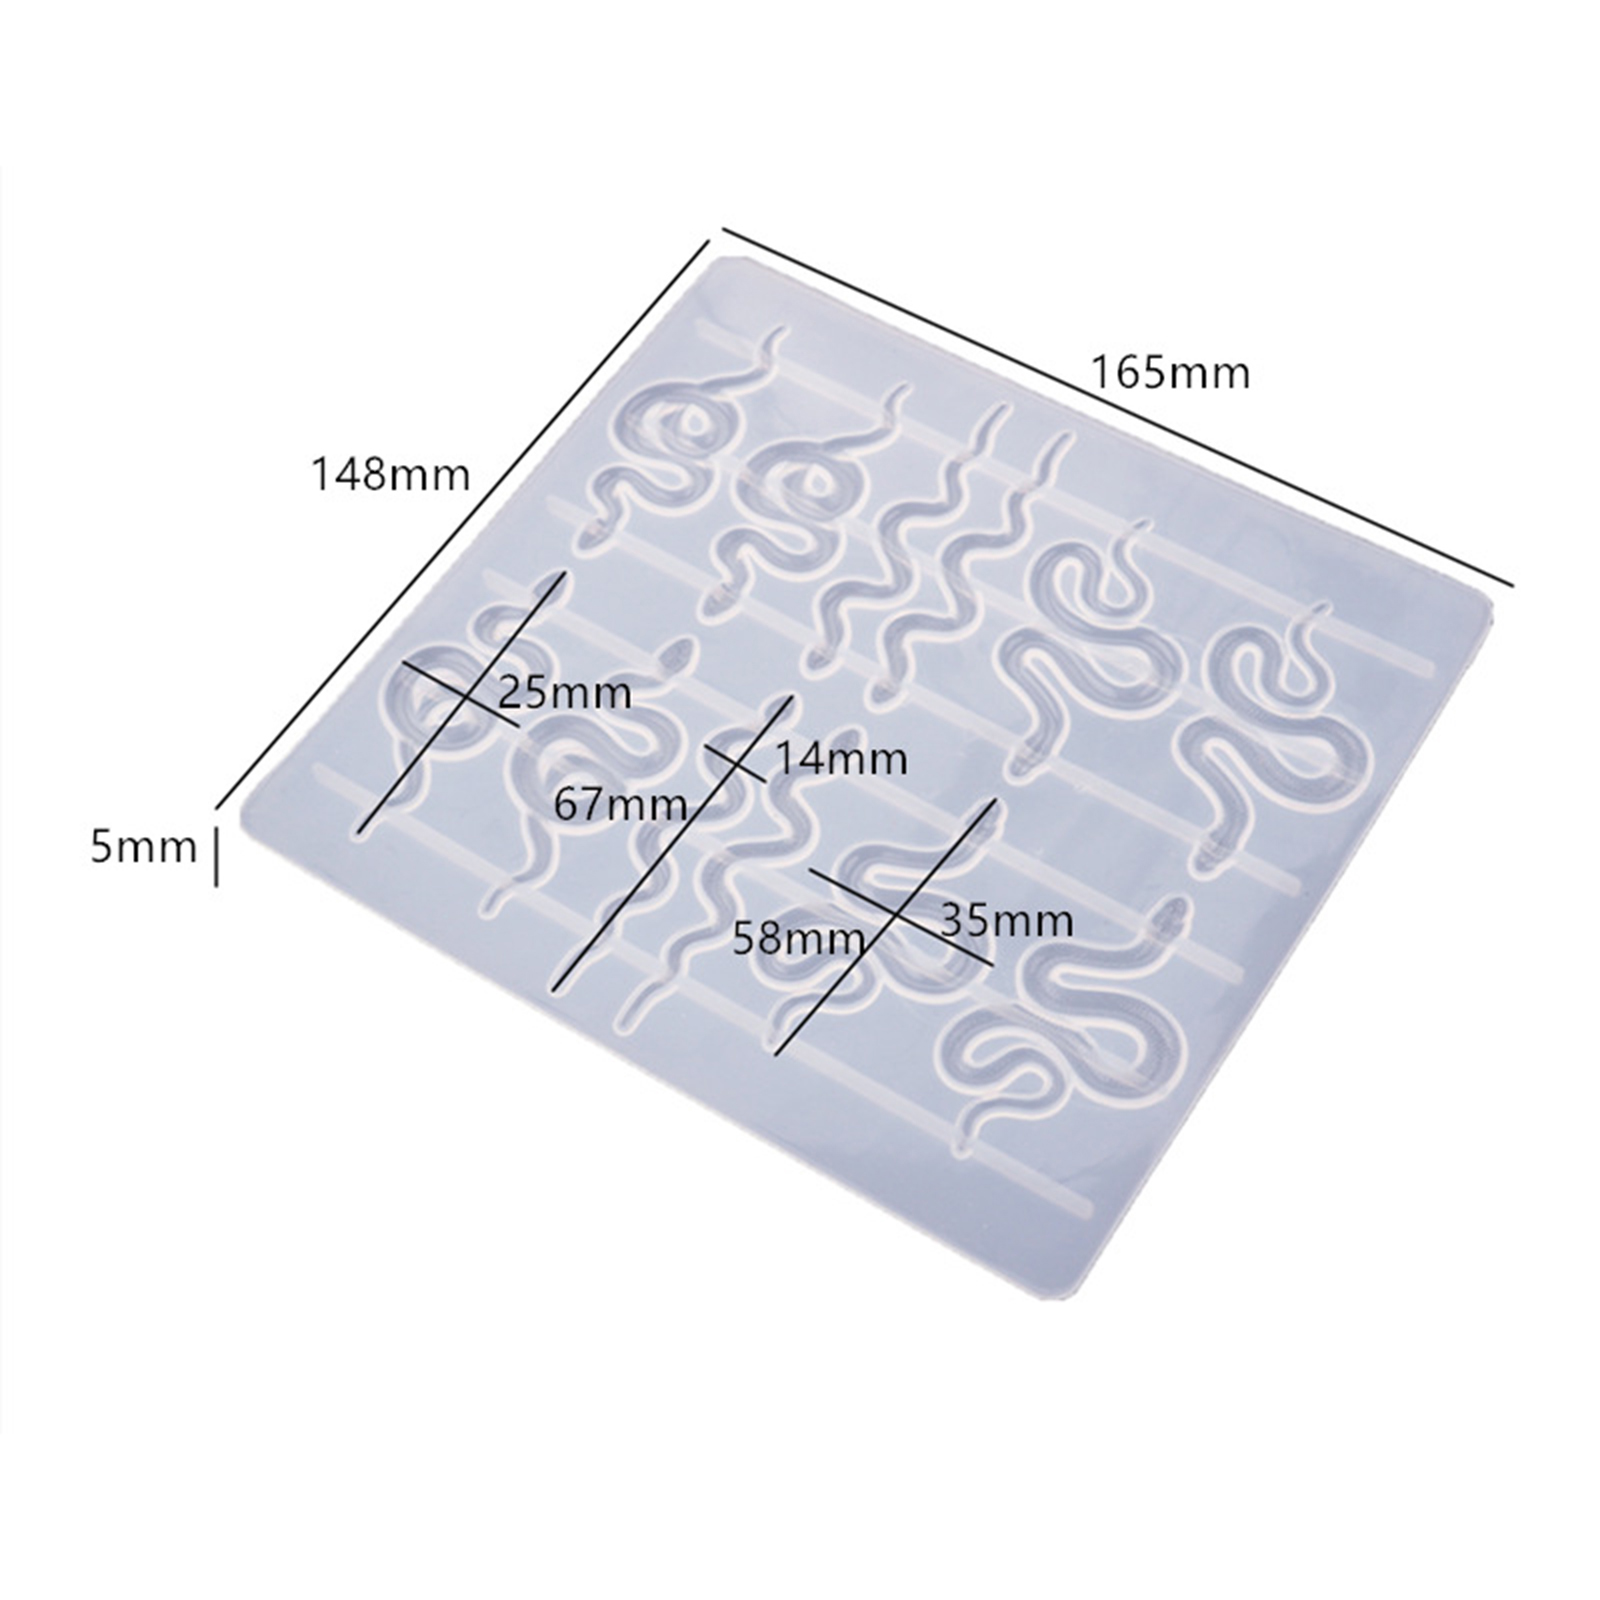 Picture of Silicone Resin Mold For Jewelry Making Rectangle Snake White 16.5cm x 14.8cm, 1 Piece